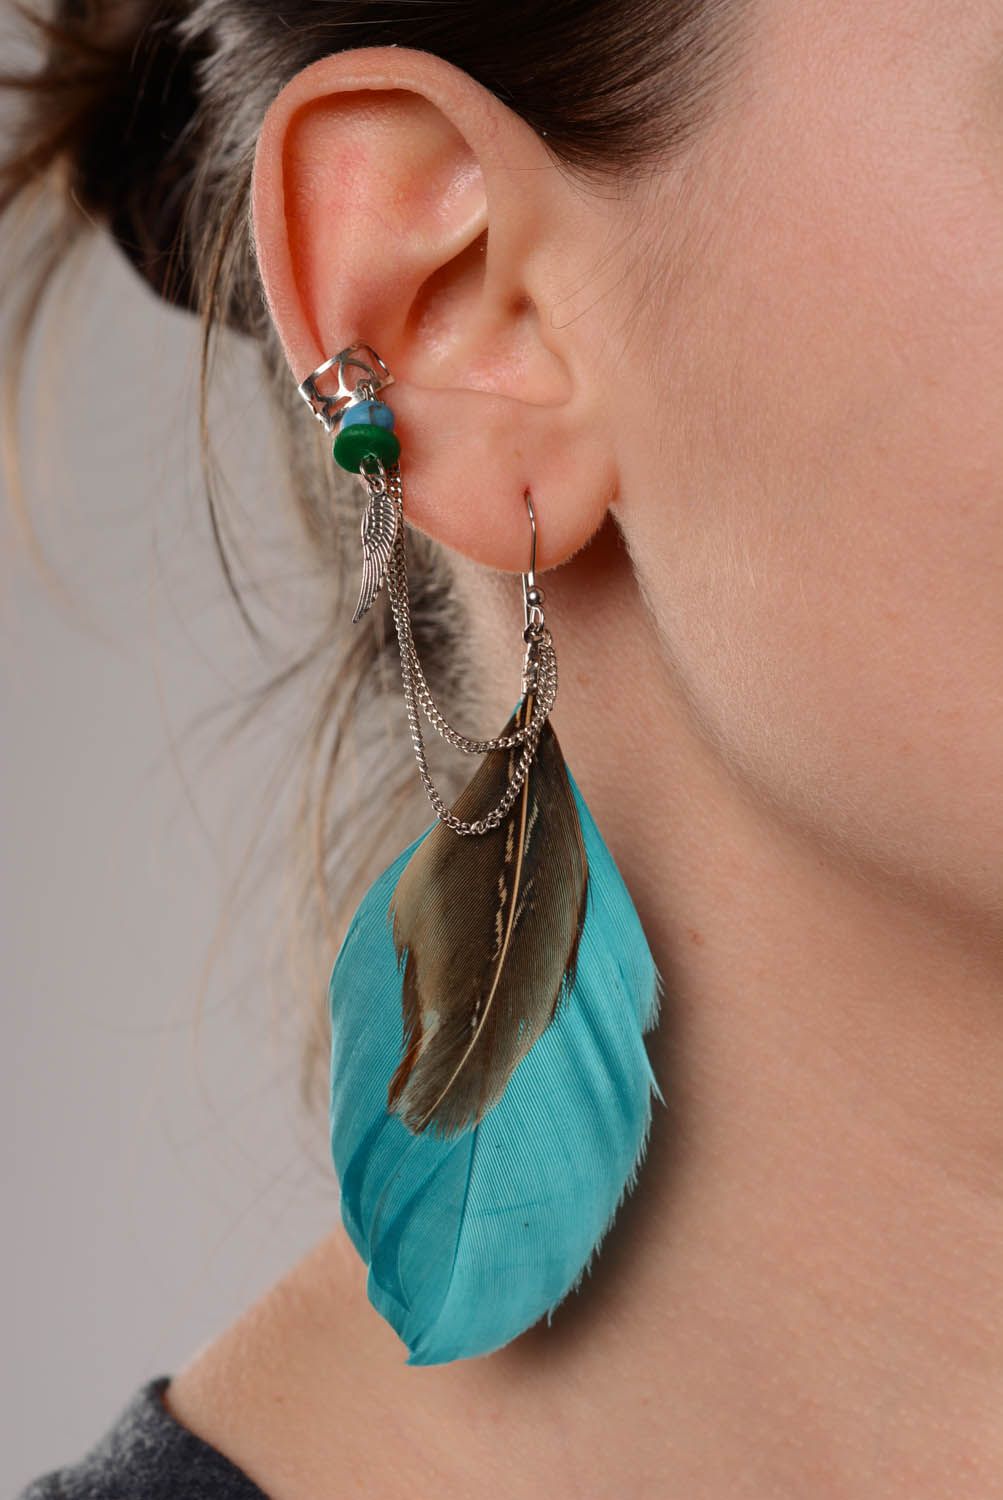 Cuff earrings Turquoise-Feathers photo 3